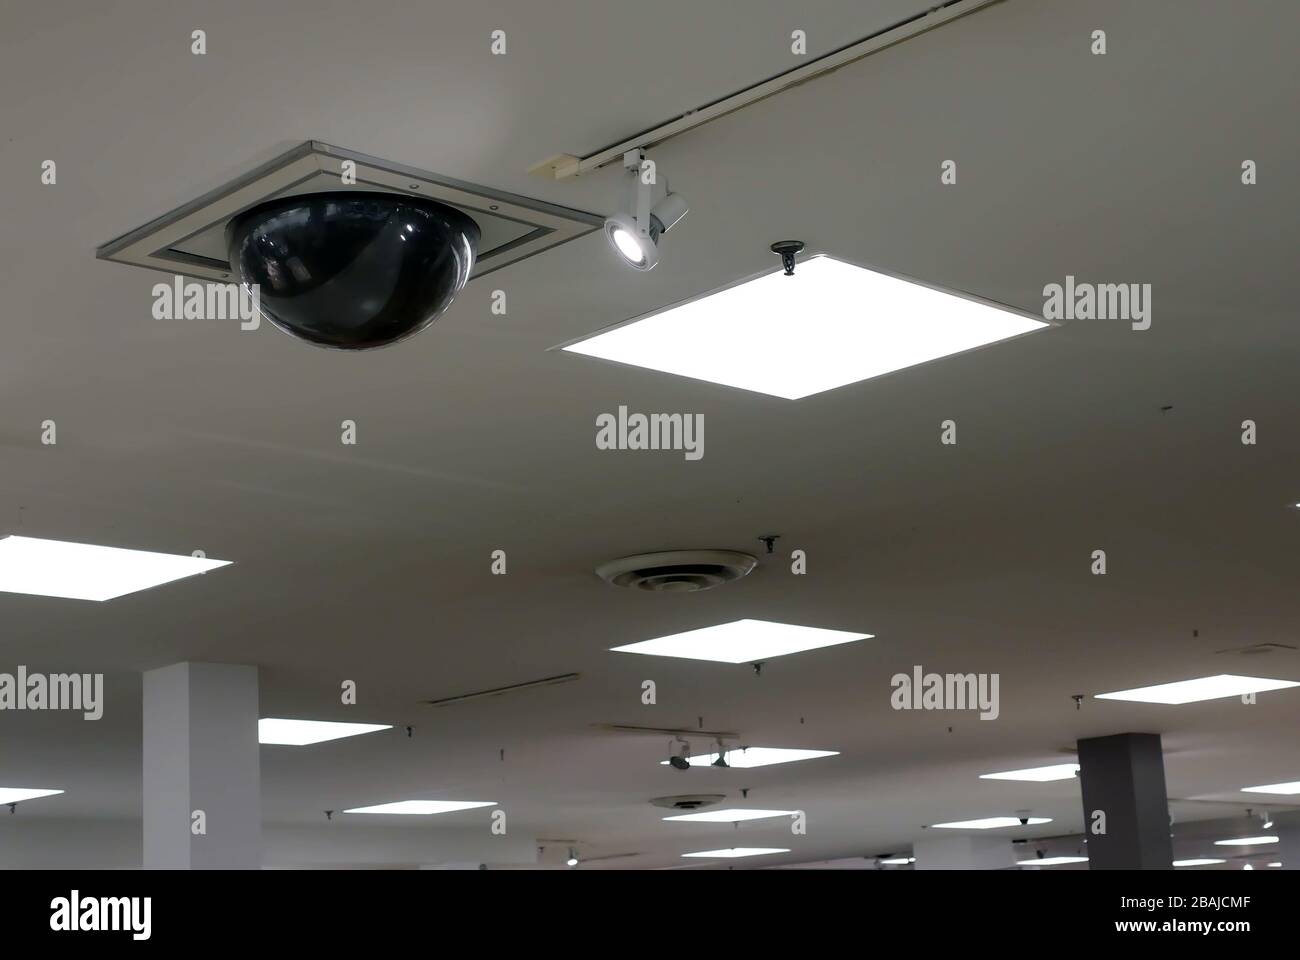 Dome security camera on top of ceiling inside Sears store Stock Photo